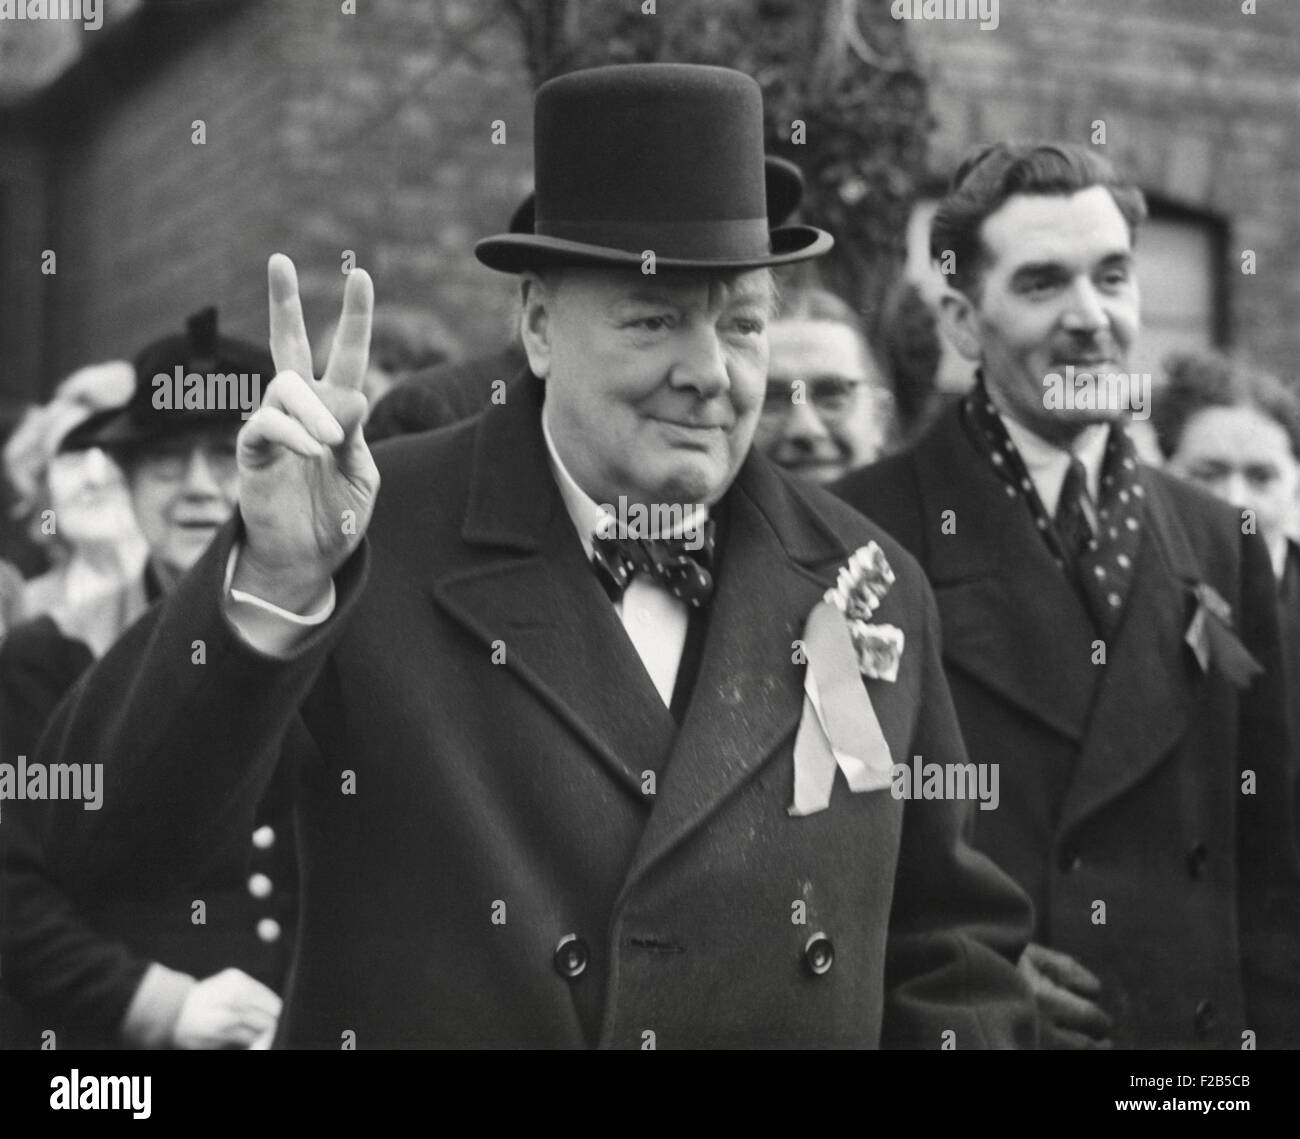 Conservative Party Leader Winston Churchill gives his familiar victory sign. He was making a last-minute campaign tour before the General Election. Woodford, Essex. Feb. 23, 1950. - (BSLOC 2014 17 60) Stock Photo